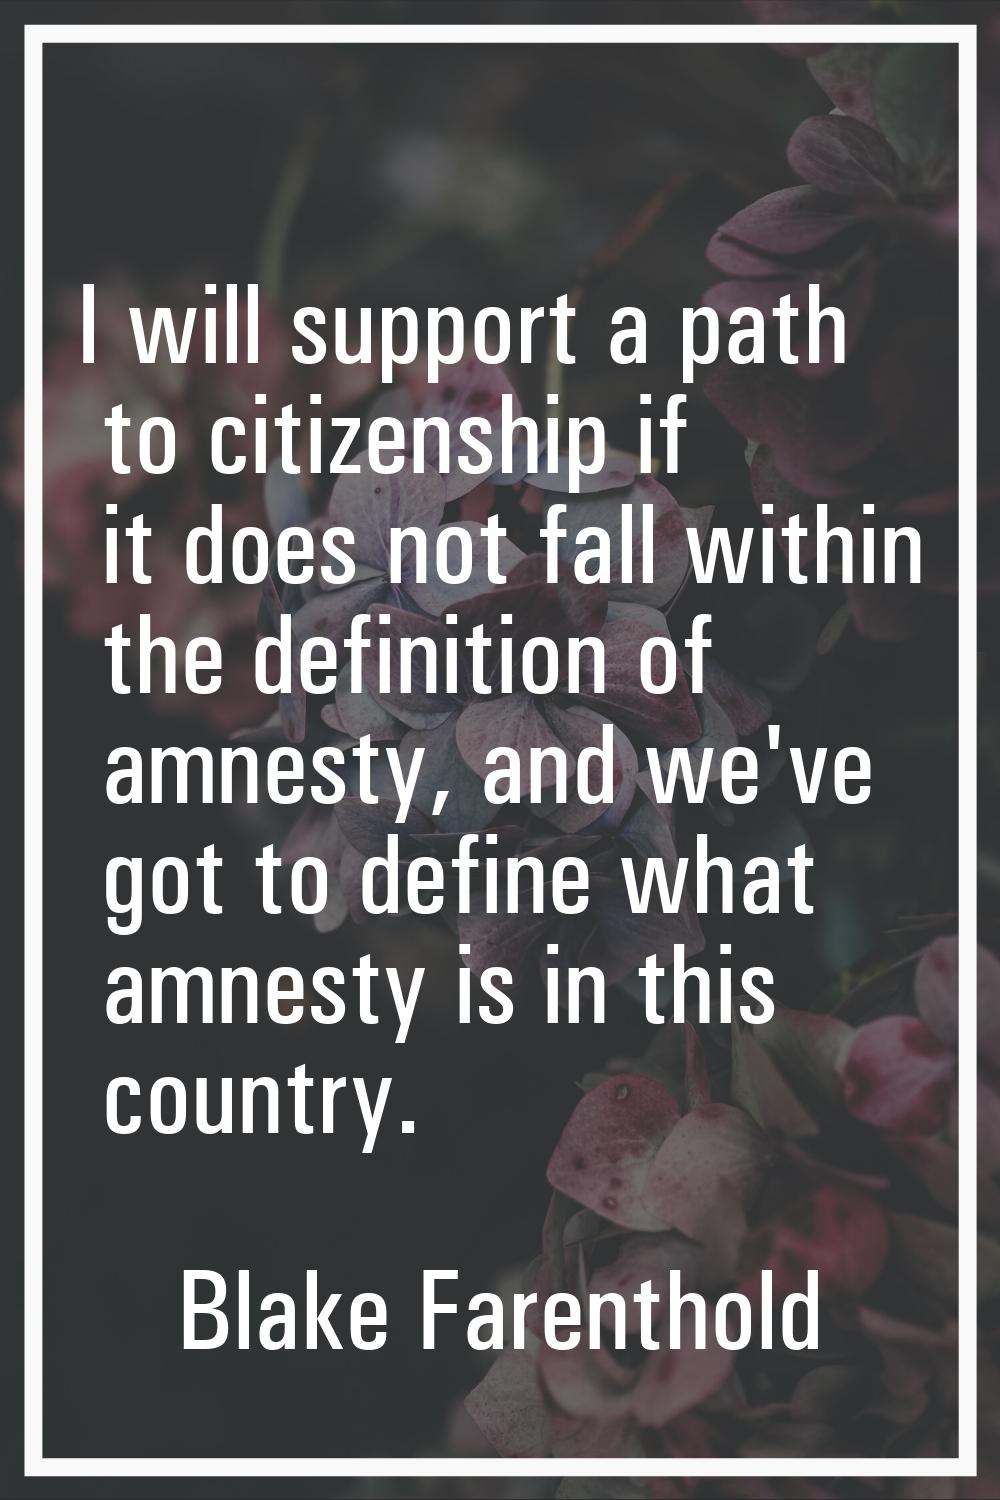 I will support a path to citizenship if it does not fall within the definition of amnesty, and we'v